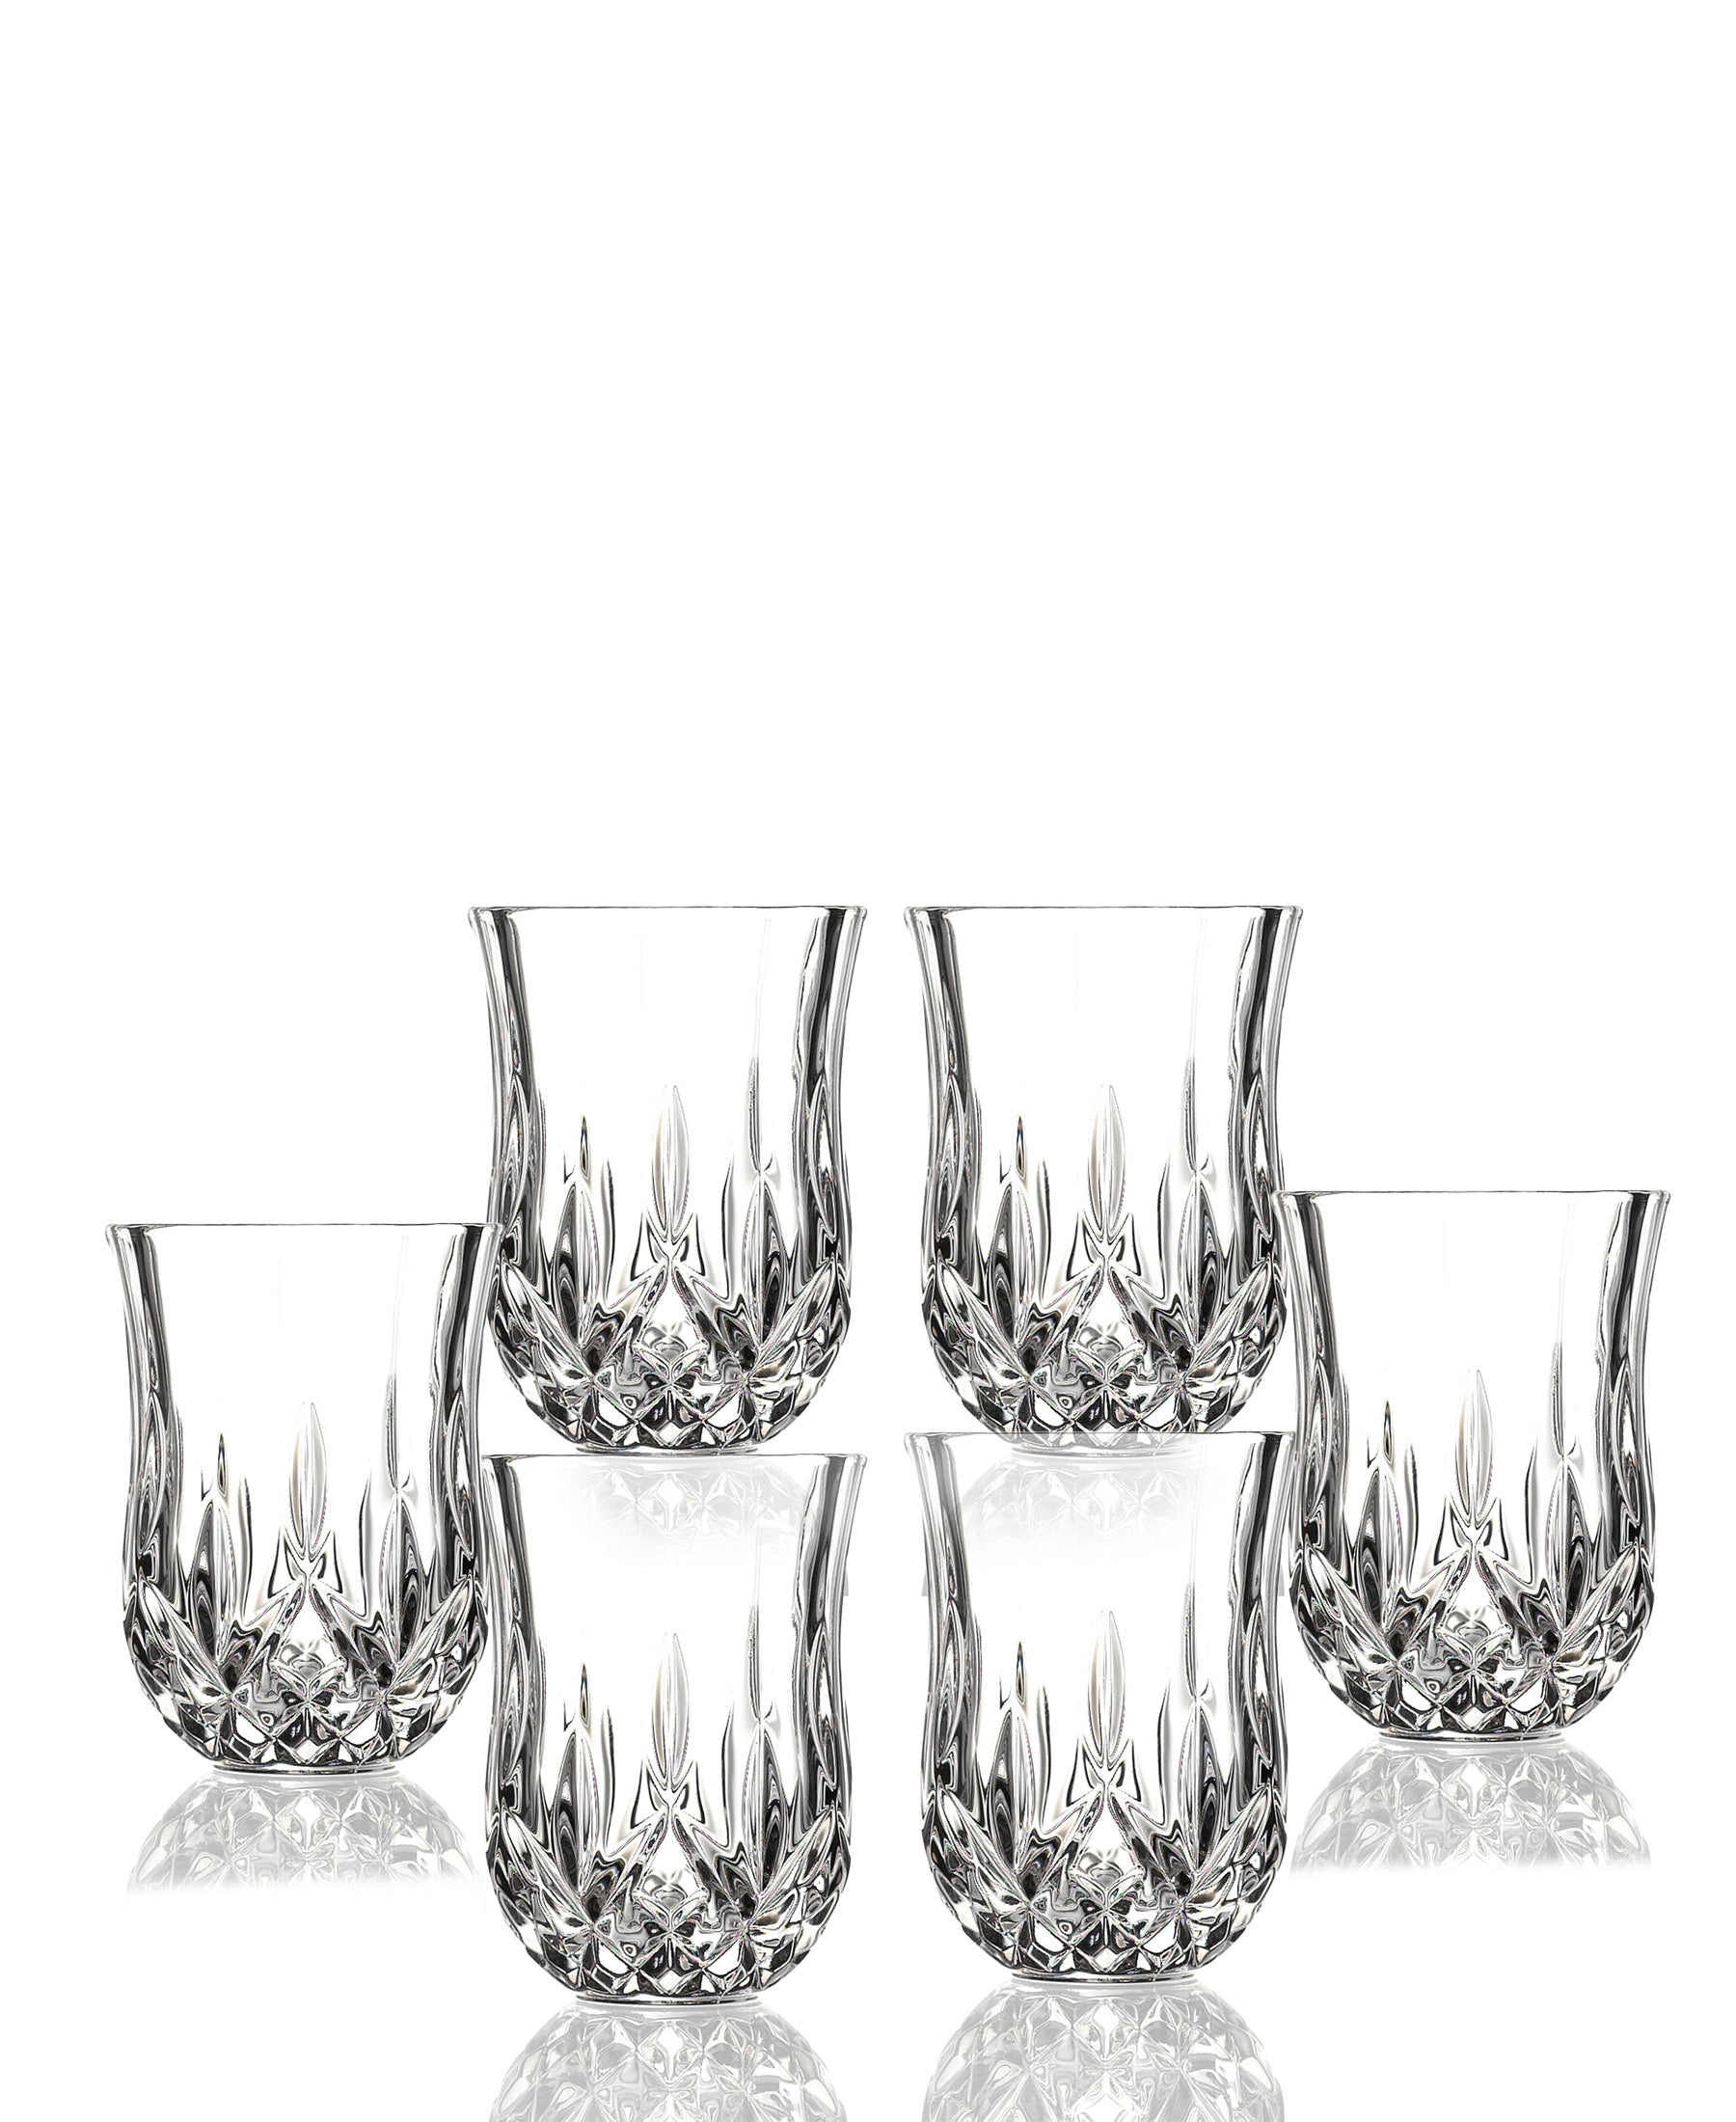 RCR Opera Whisky Glasses Set of 6 And Decanter - Clear – The Culinarium